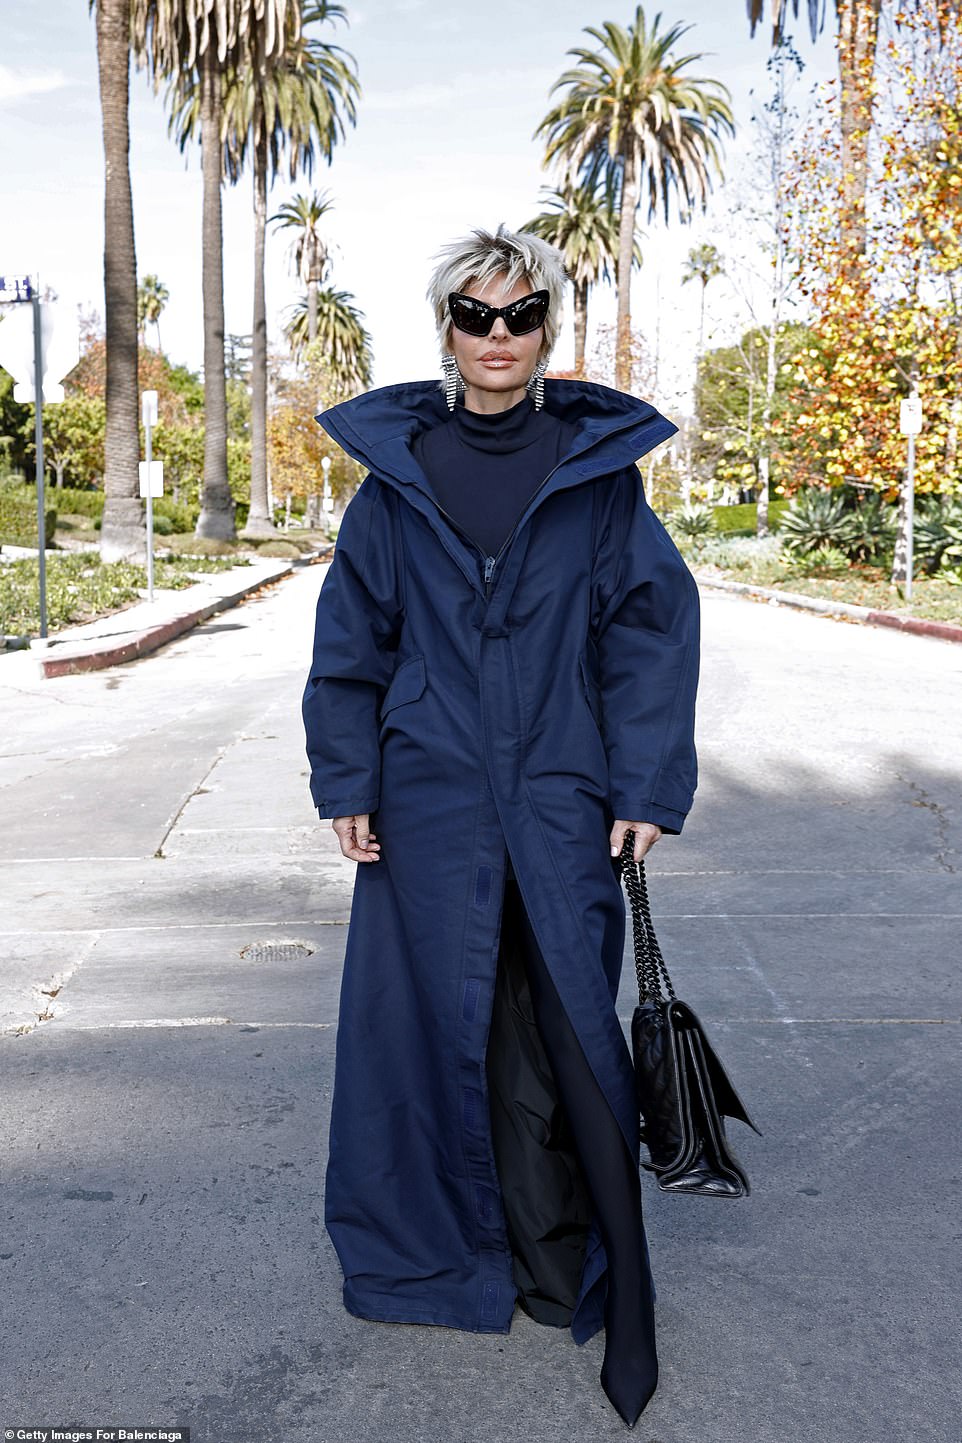 For the show, the Real Housewives of Beverly Hills alumna donned a floor-sweeping, deep blue raincoat-style trench coat over a turtleneck top and black pantaleggings